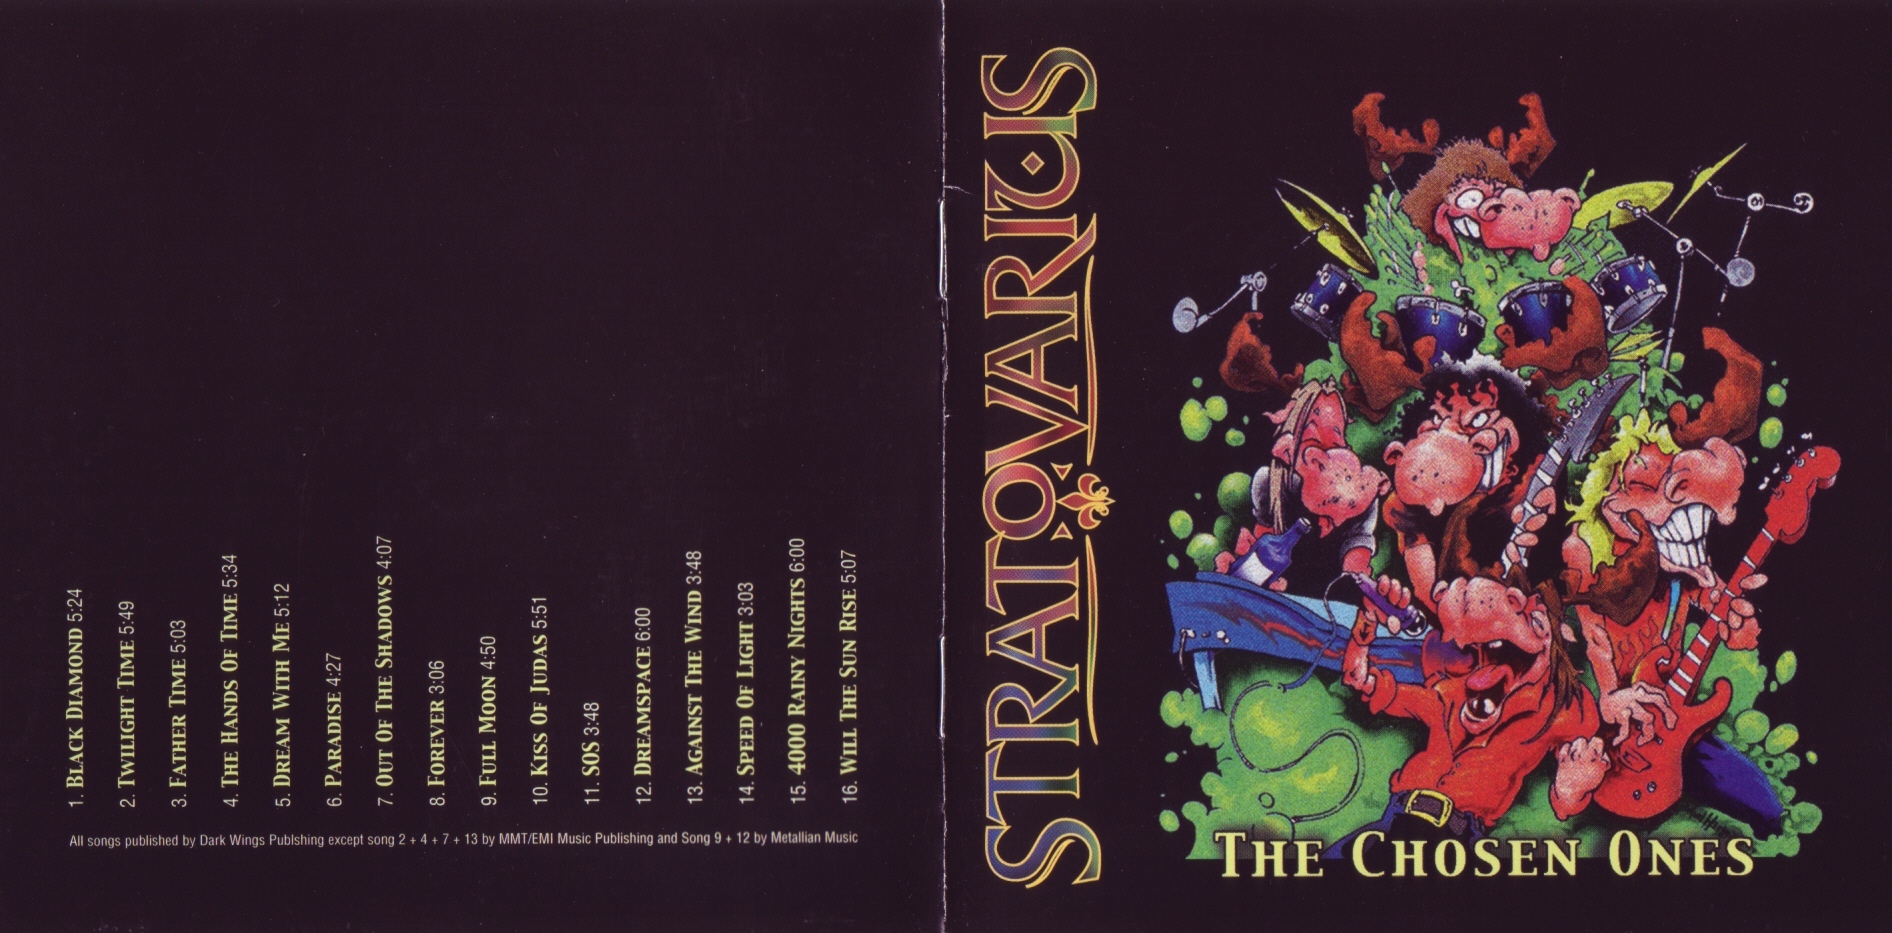 The Chosen Ones by Stratovarius (CD, Nov-1999, Noise) for sale online